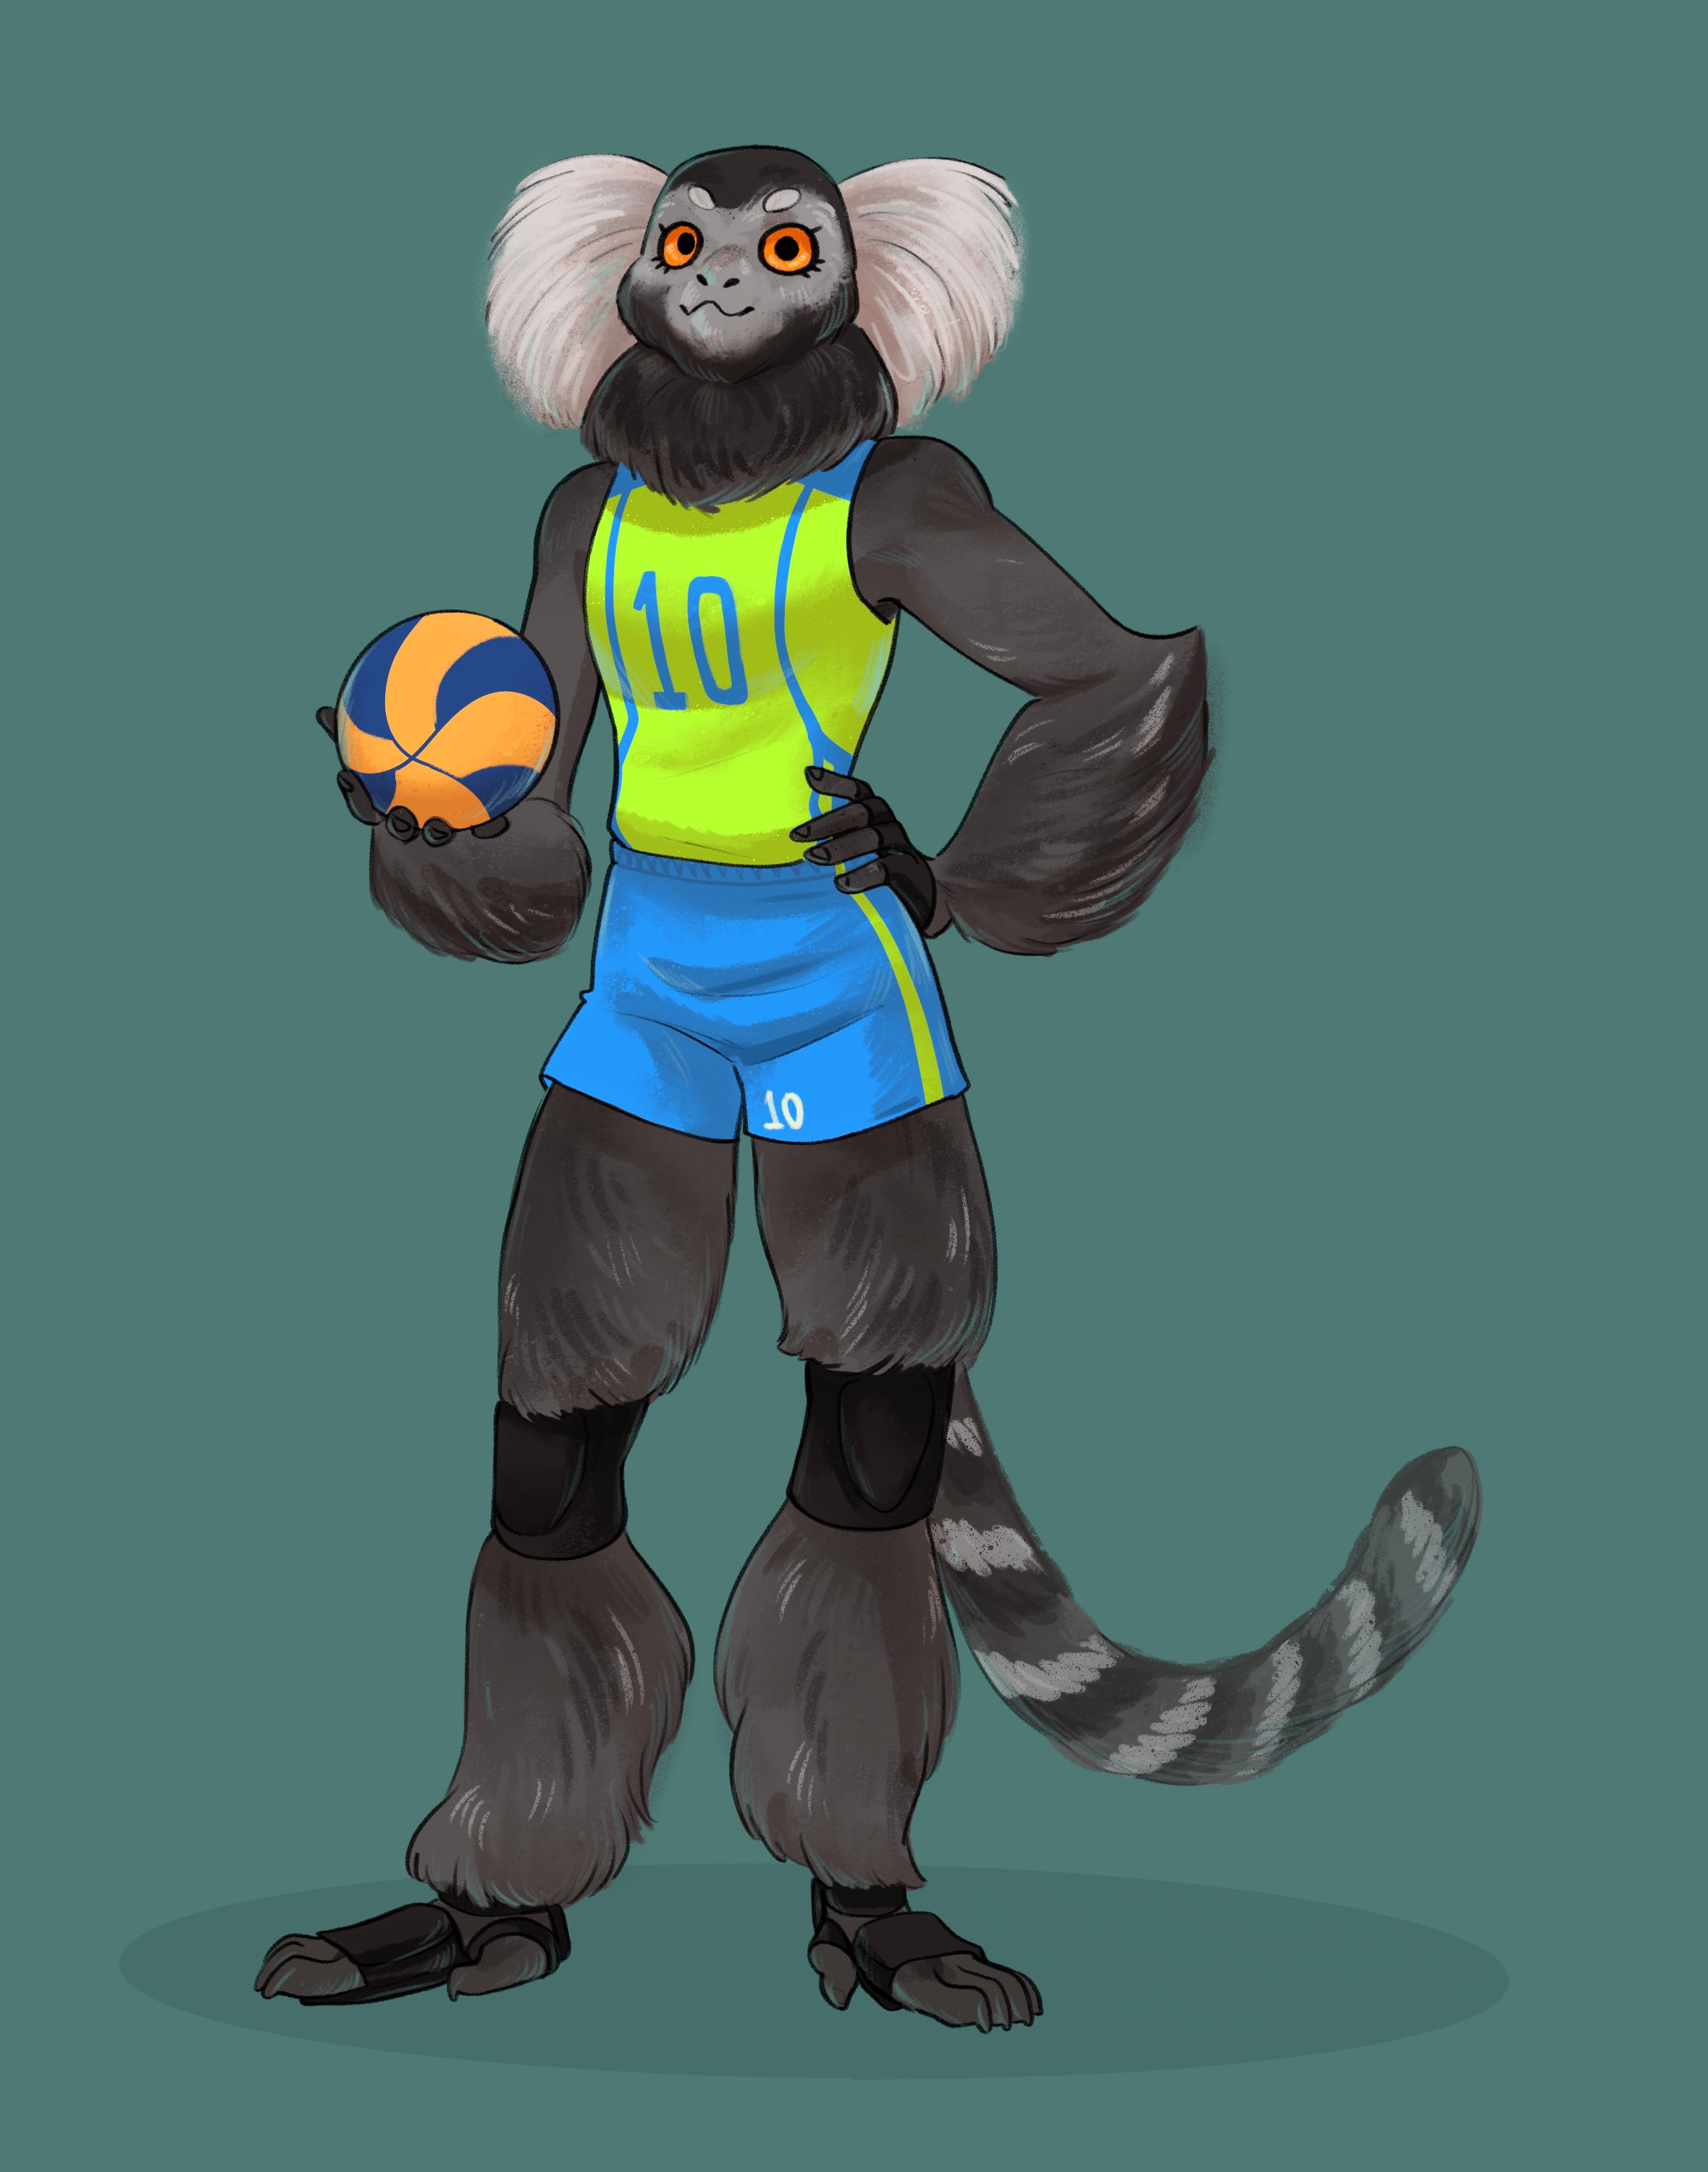 Sagui character for a discord volleyball team, had a lot of fun designing his “shoes”.